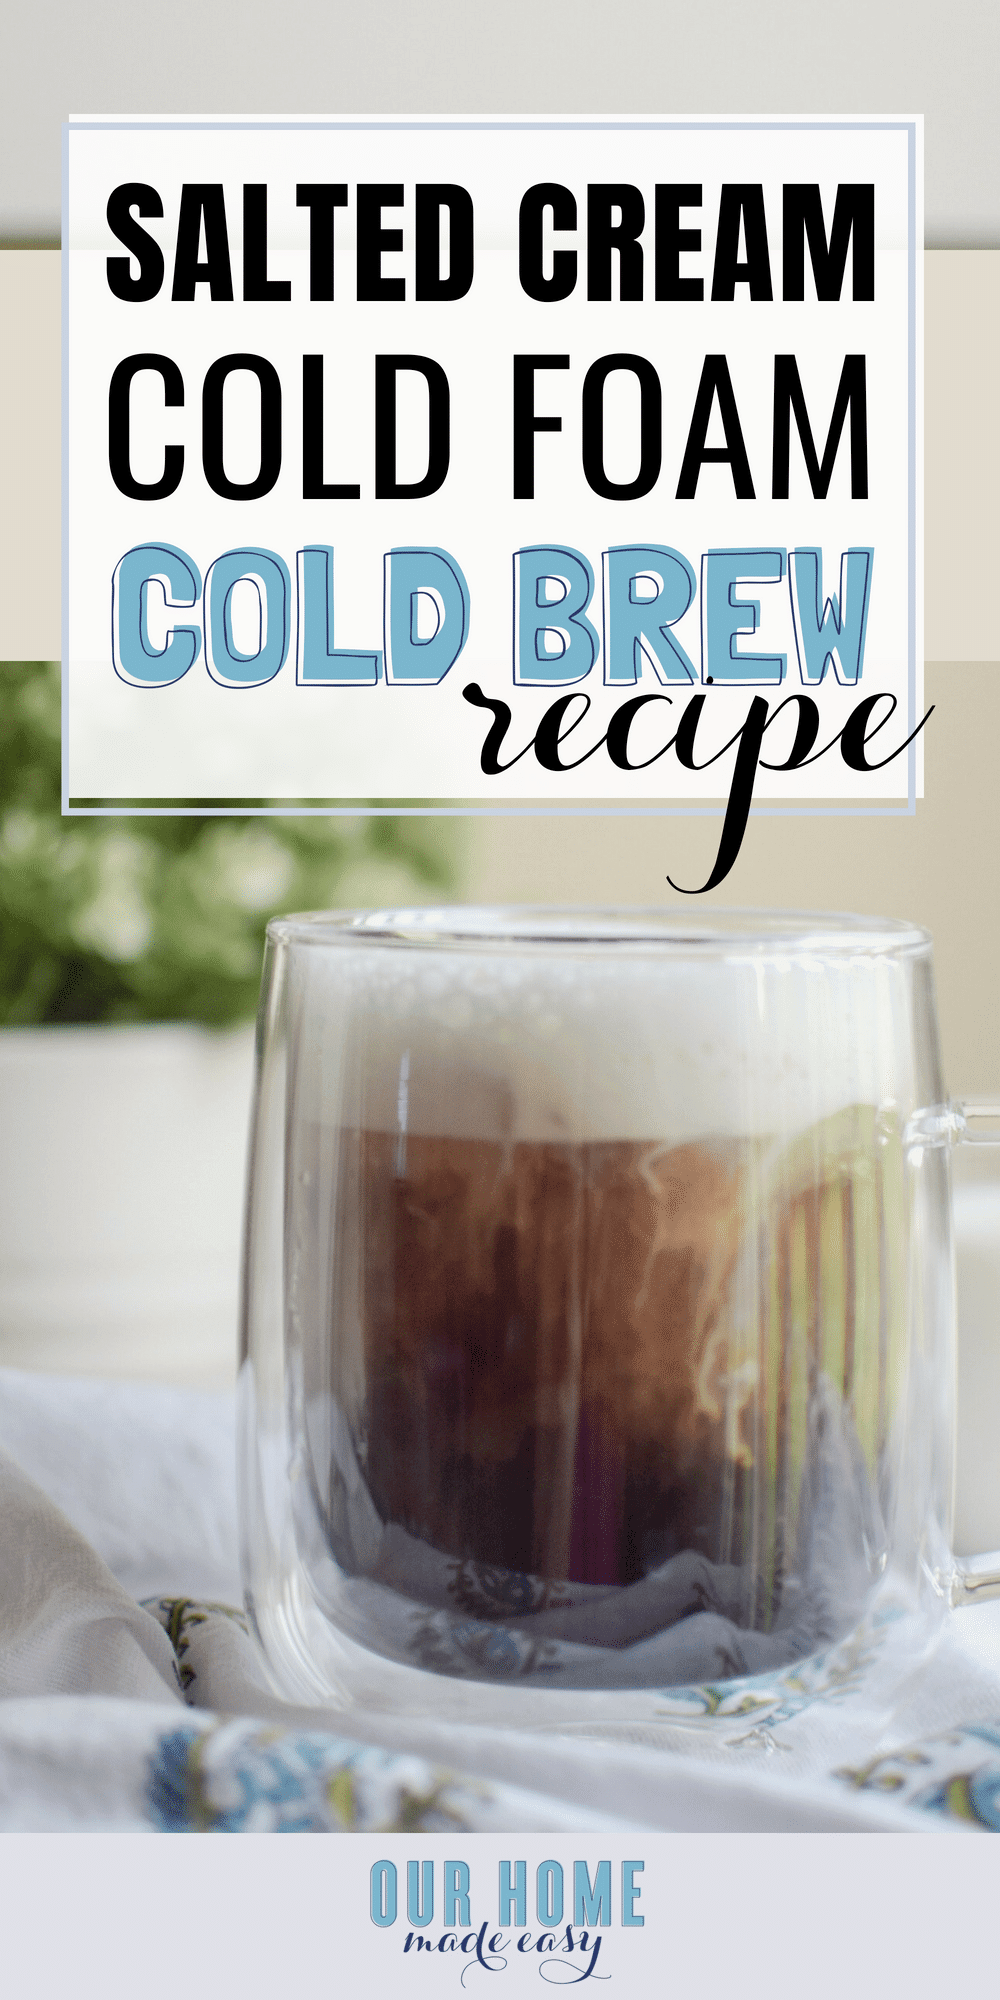 https://www.ourhomemadeeasy.com/wp-content/uploads/2018/08/salted-cream-cold-foam-cold-brew.png